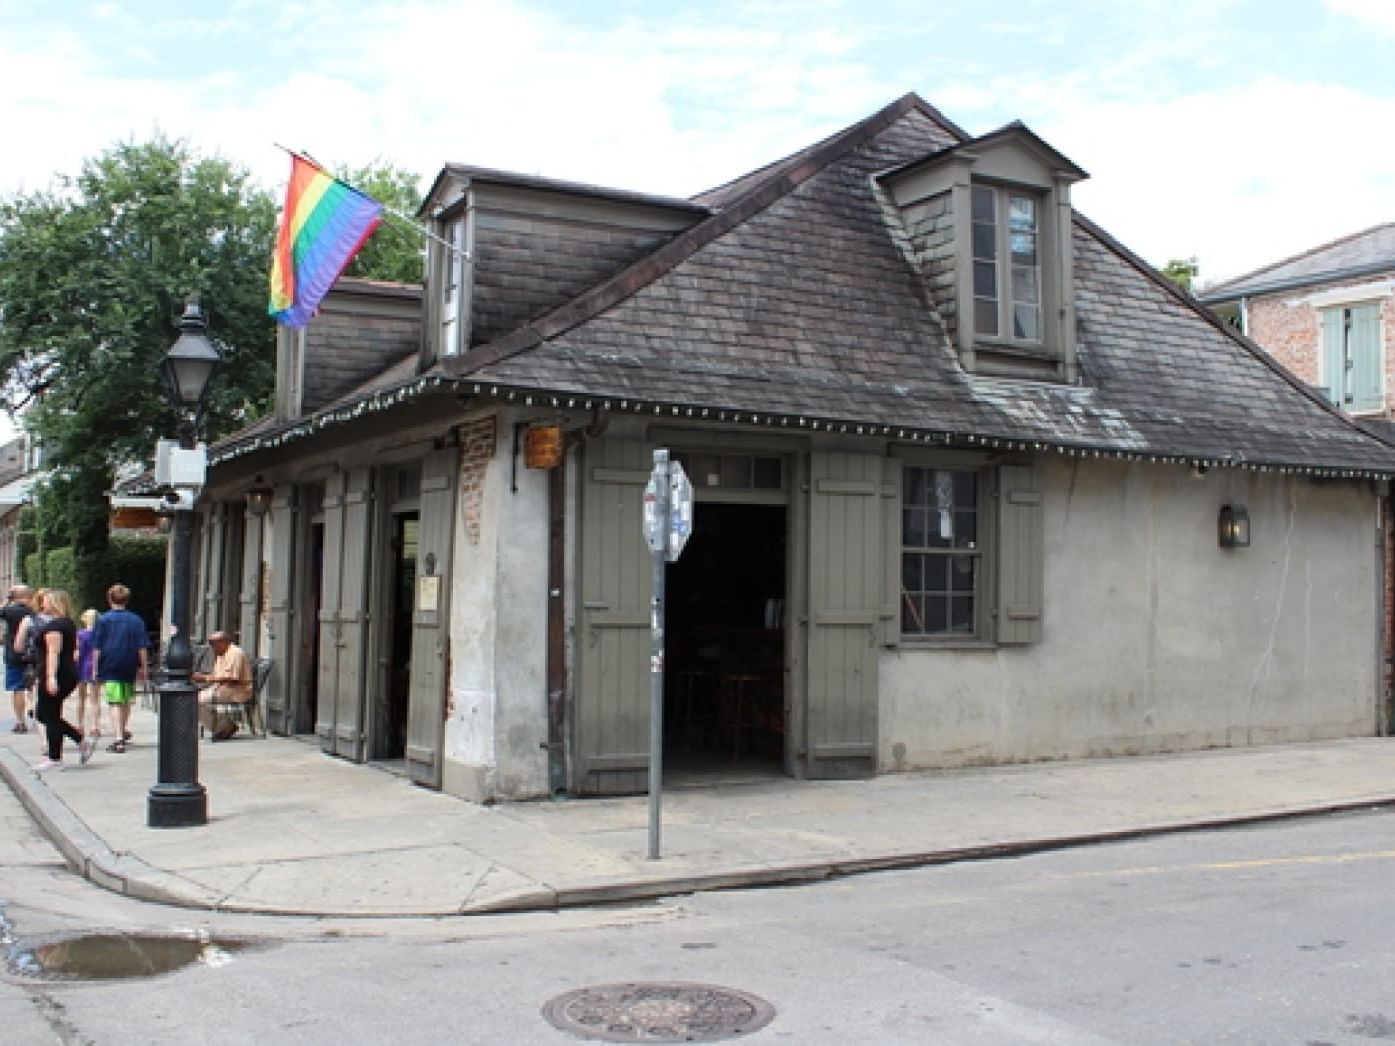 Exterior view of the Lafitte's Blacksmith Shop and Bar